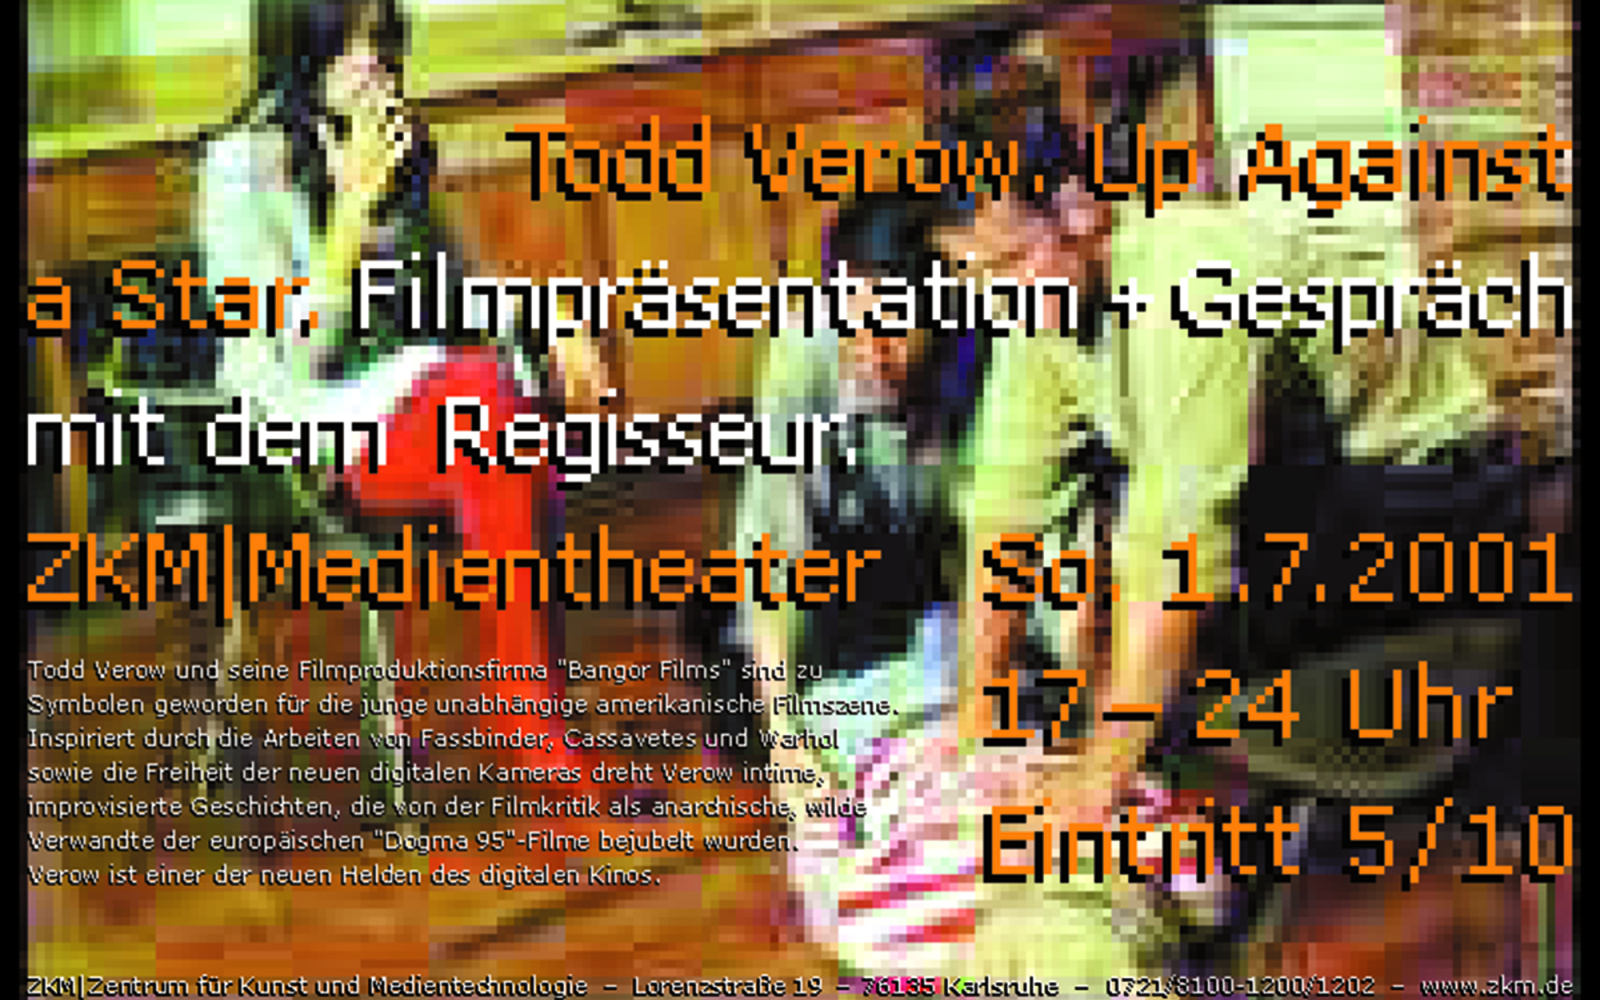 Poster for the event "Todd Verow - Up Against a Star": In the background a film still showing three people.